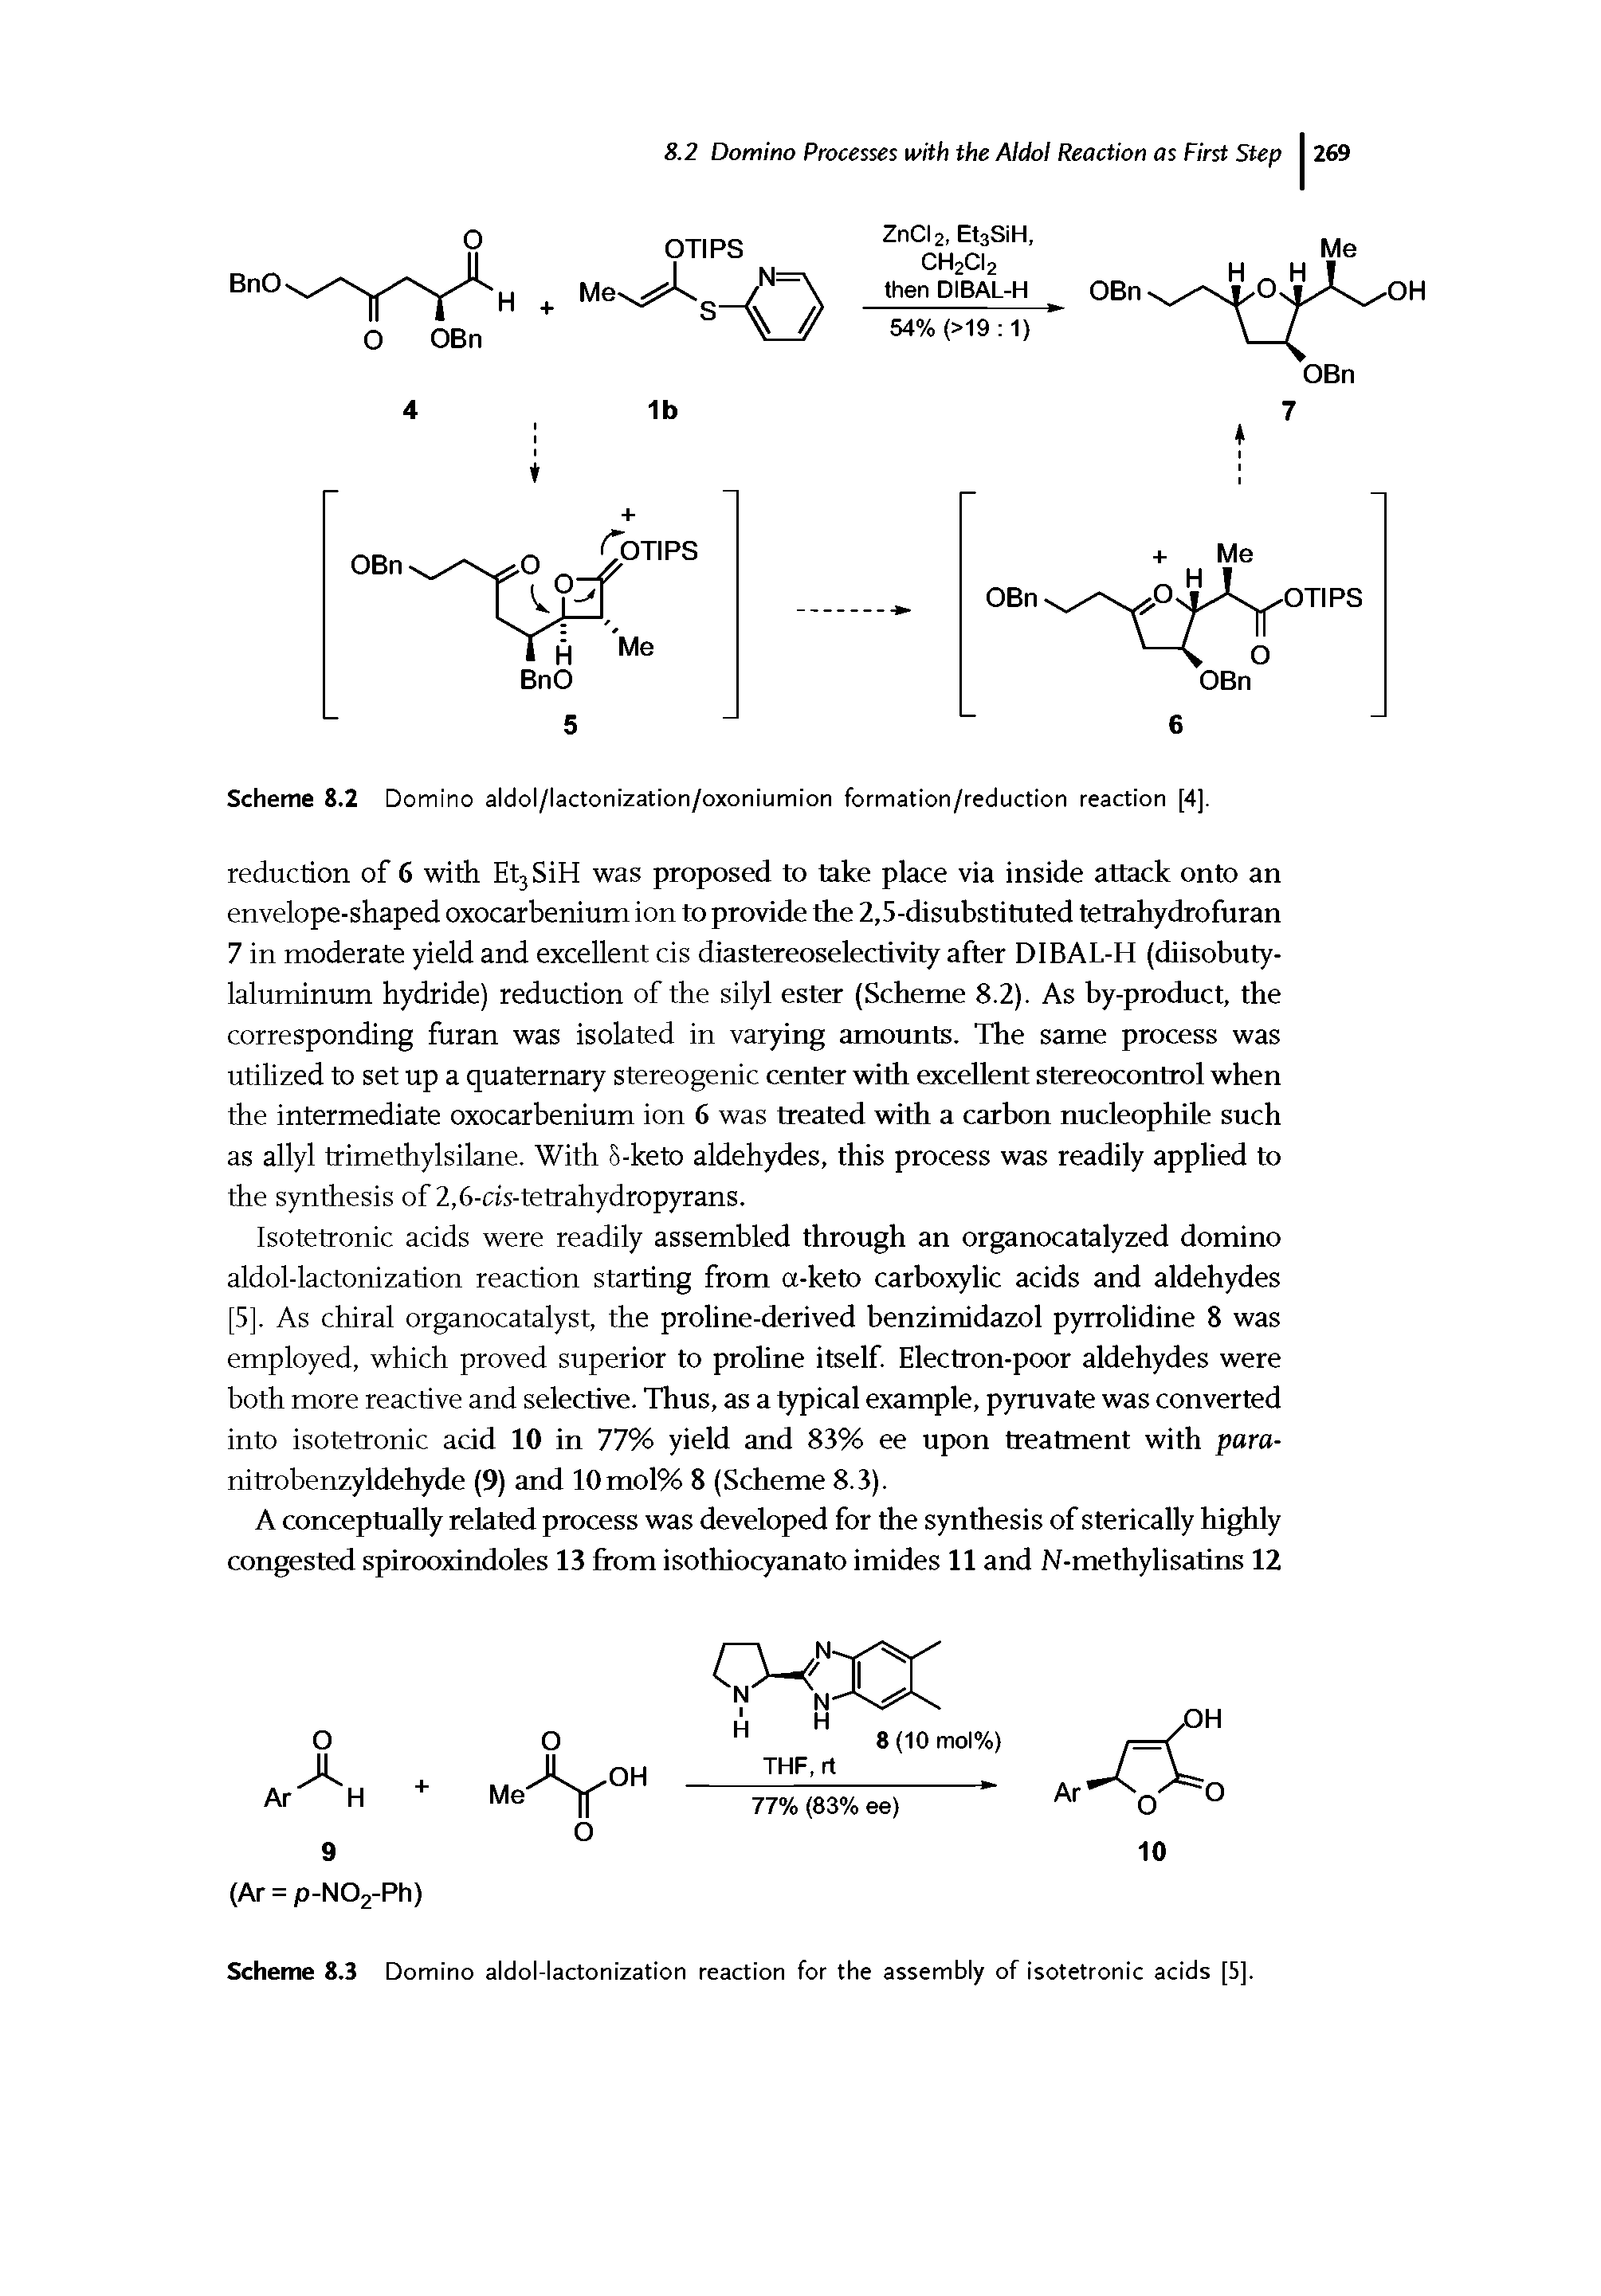 Scheme 8.3 Domino aldol-lactonization reaction for the assembly of isotetronic acids [5].